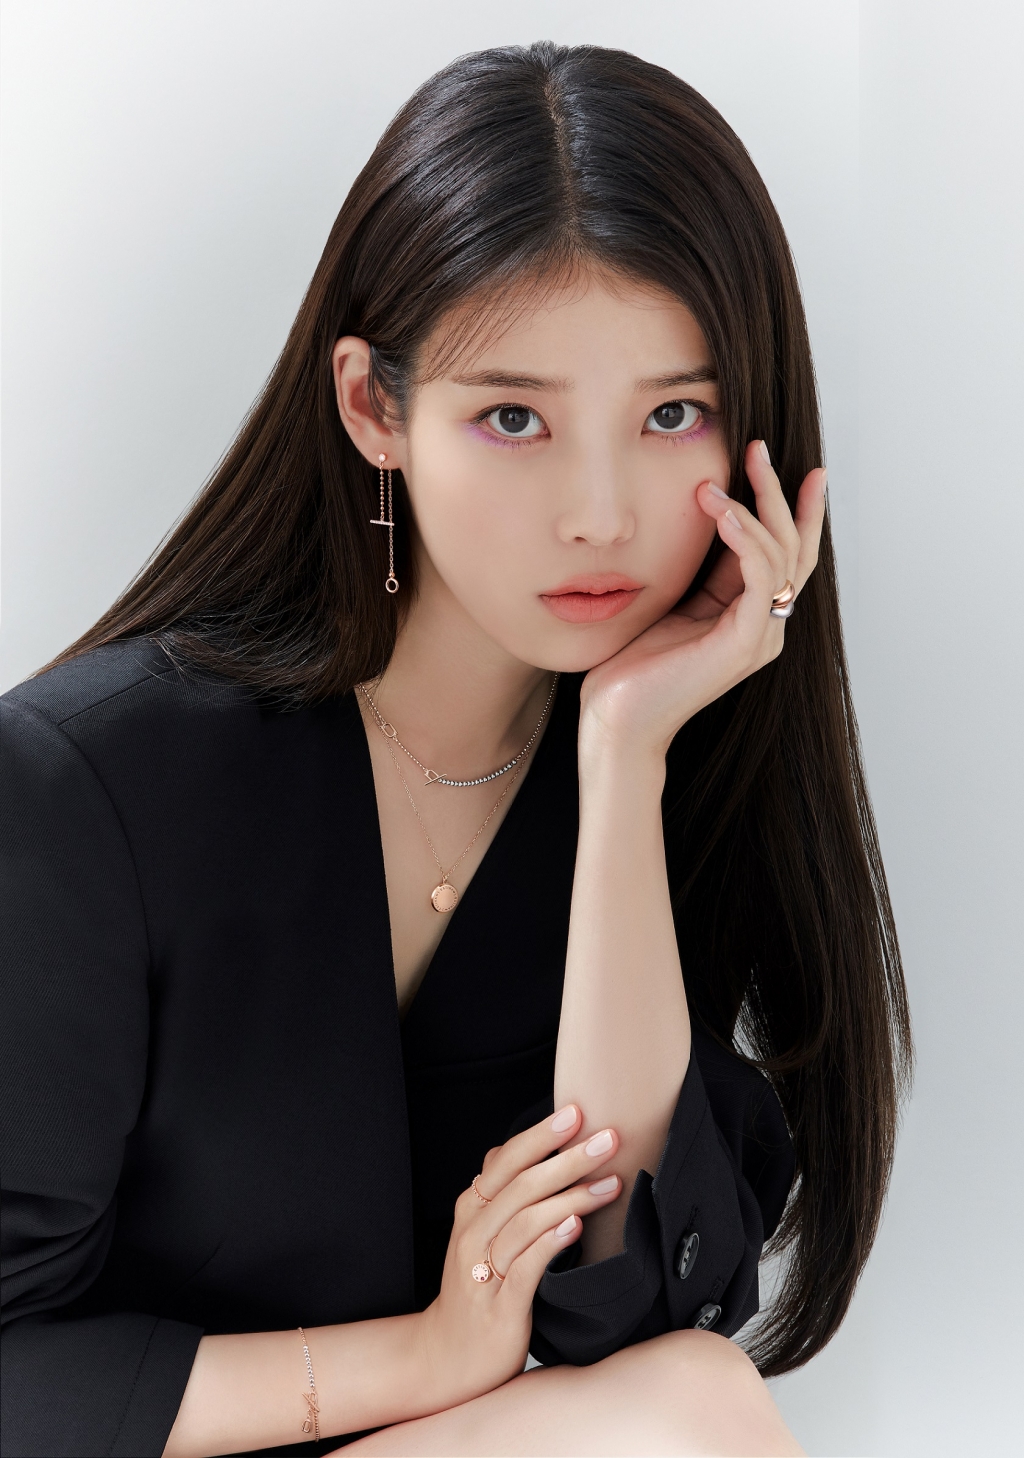 Singer IU presented a picture of a dignified and charismatic atmosphere.Global luxury brand J. Estina (J.ESTINA) unveiled its 2020 Autumn Advertising Campaign with Muse IU (IU) on Monday.This seasons advertising campaign I J. Estina You (I J.ESTINA U) portrayed a trendy, changed brand image through the Model IU, like a brand symbol that was renewed last year.The IU in the public picture showed a more mature and dignified appearance from the existing pure and lovely image.Wearing a chic black jacket, IU created a mysterious atmosphere with a casual look and a point eye makeup that was pink under the eyes.The Dream COIN (DREAM COIN) necklace worn by the IU is a collection of Jay Ete (J ete).On the back of the COIN pendant, Tiara, a symbol of good fortune, was imprinted and it had a special meaning of supporting your dream.IU, which was worn with a chic black jacket and pants and black high heels, gave off charisma with an all-Black look.Here, IU matched jewelery using Brand initials, showing luxurious yet elegant charm.In another pictorial IU boldly pulled back a refreshing denim jacket, revealing a slender neckline.IU is a back door that has completely digested the shooting concept with various facial expressions and professional attitudes and has impressed the field staff.The IU also boasted a unique visual, perfecting its unique Number 1 (Lavender Mist) makeup with a warm Number 1 (Lavender Mist) Angora knit.The IU, which matched dark blue stone jewelery reminiscent of the universe in a warm kite 1 (Lavender Mist) knit, showed a dreamy atmosphere at once with a languid and languid eyes.On the other hand, jewelery worn by IU in the picture can be found at J. Estina stores and official online malls nationwide.J. Estina unveils IU and I J.ESTINA U campaign pictorial...Dignified female expression